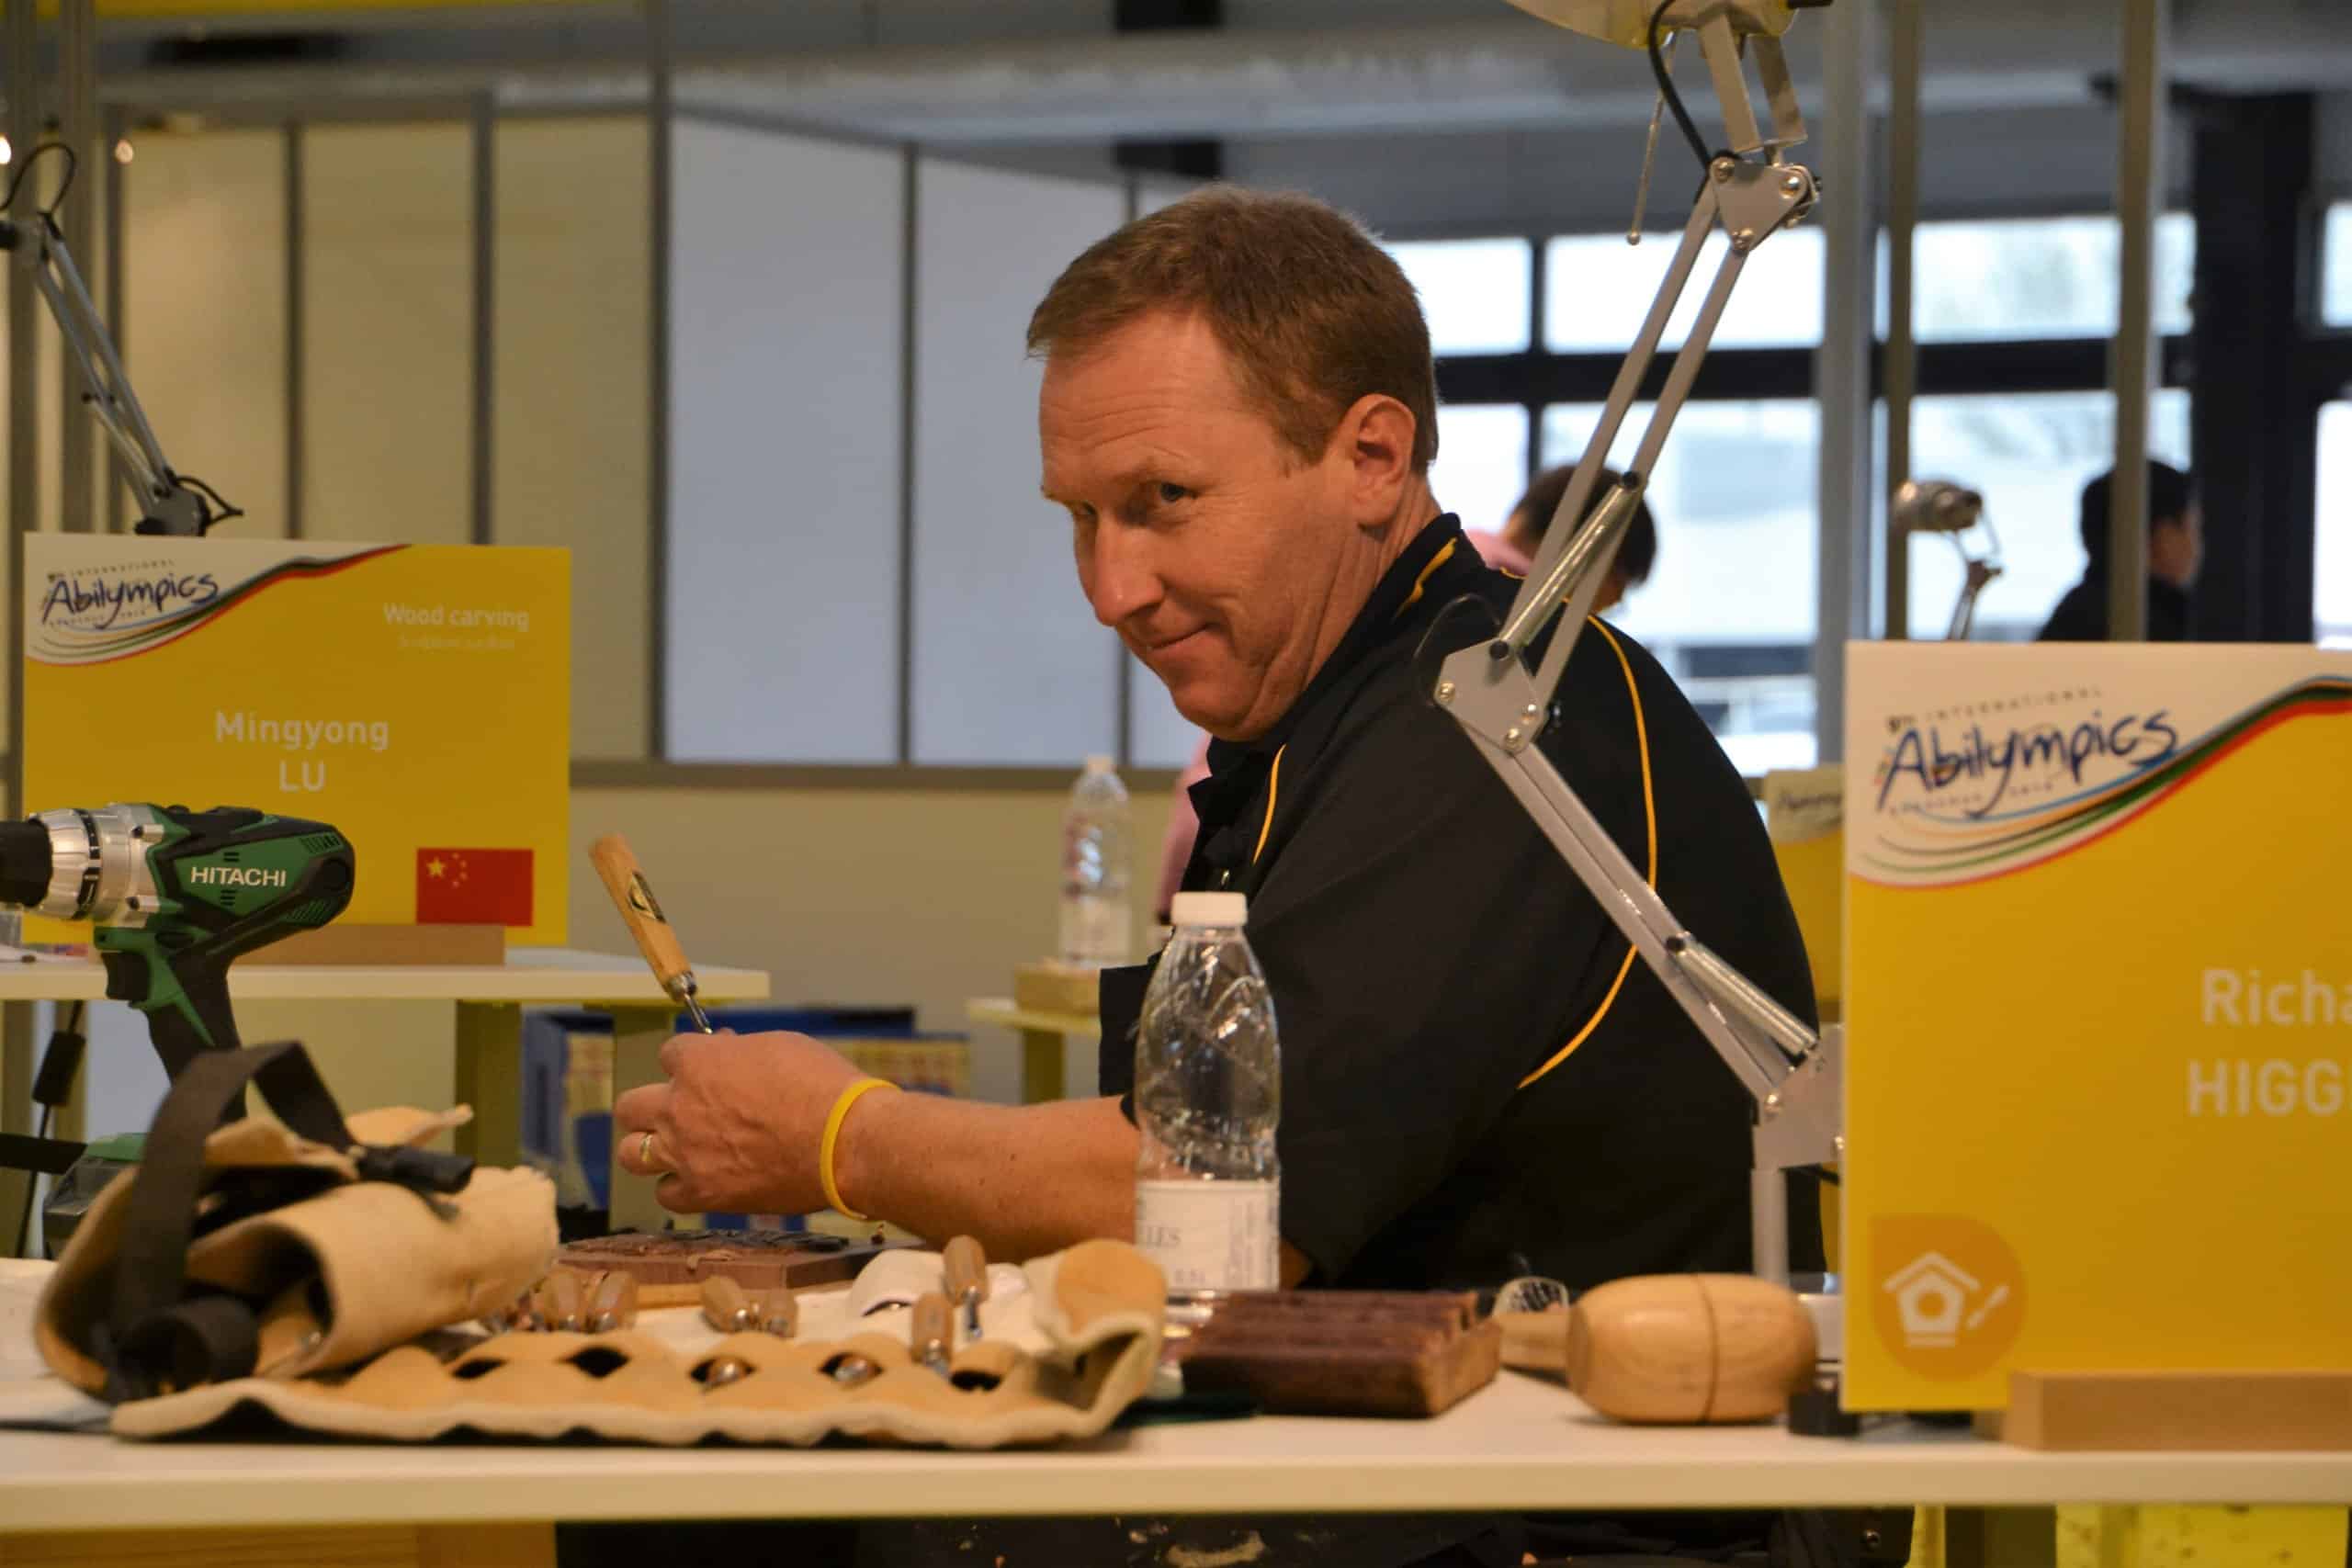 Richard Higgins competing in the wood carving event